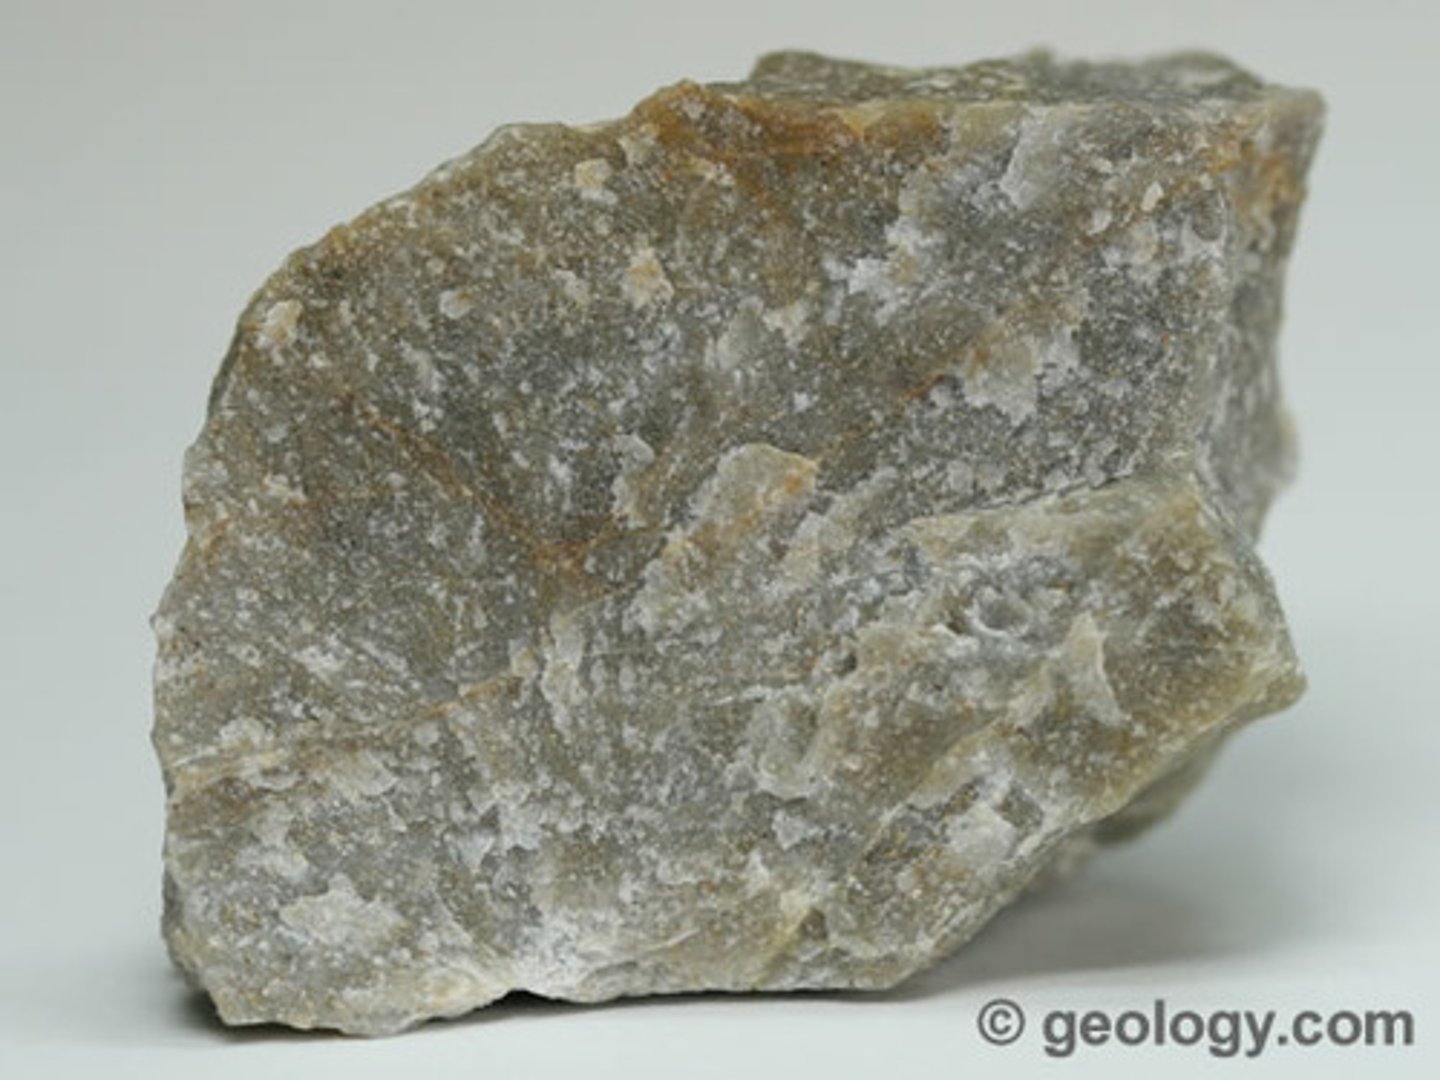 <p>A metamorphic rock with a texture that gives the rock a scattered appearance (see image).</p>